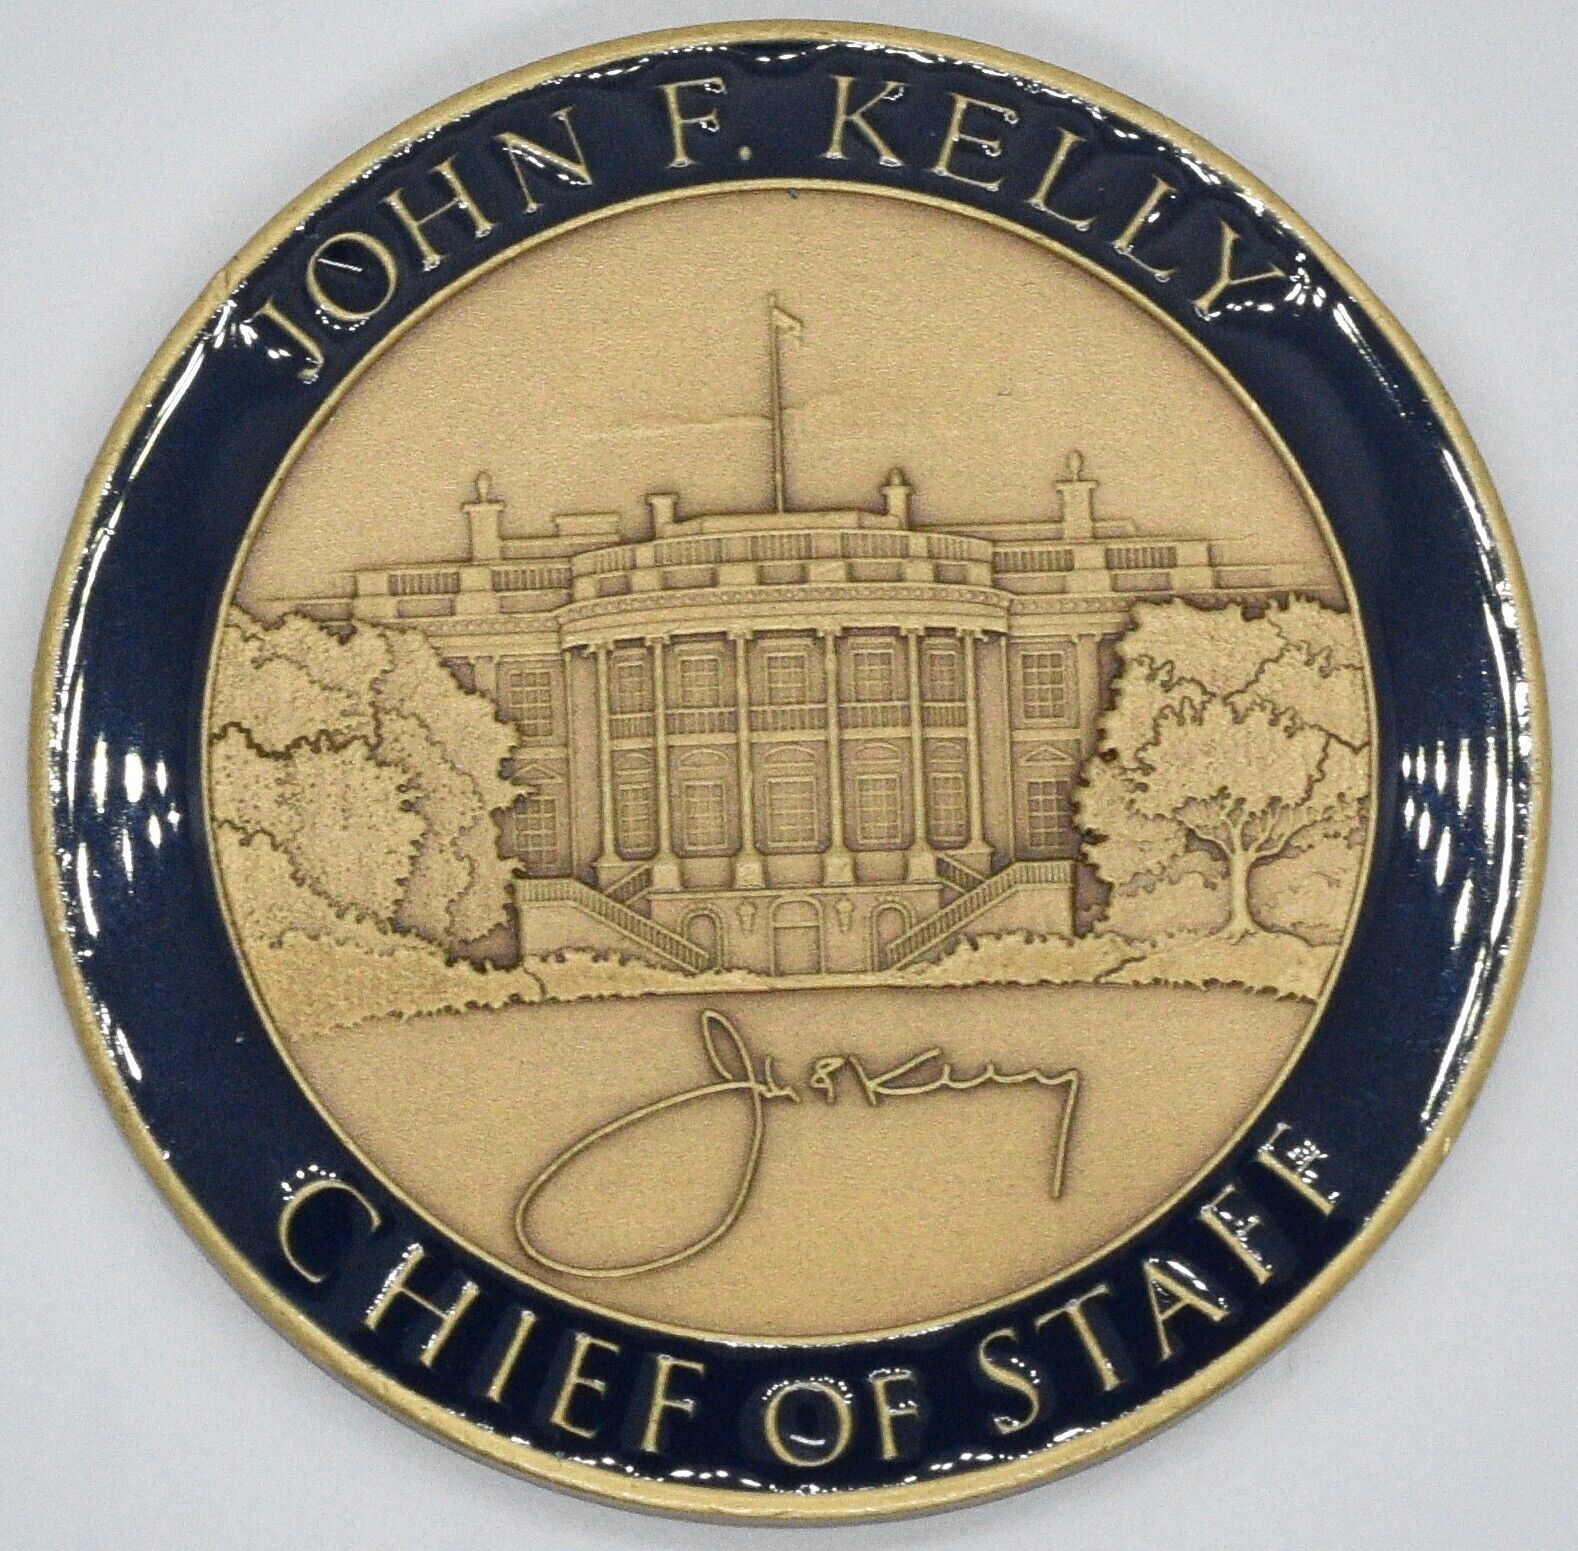 General JOHN F. KELLY White House Donald Trump Chief of Staff Challenge Coin